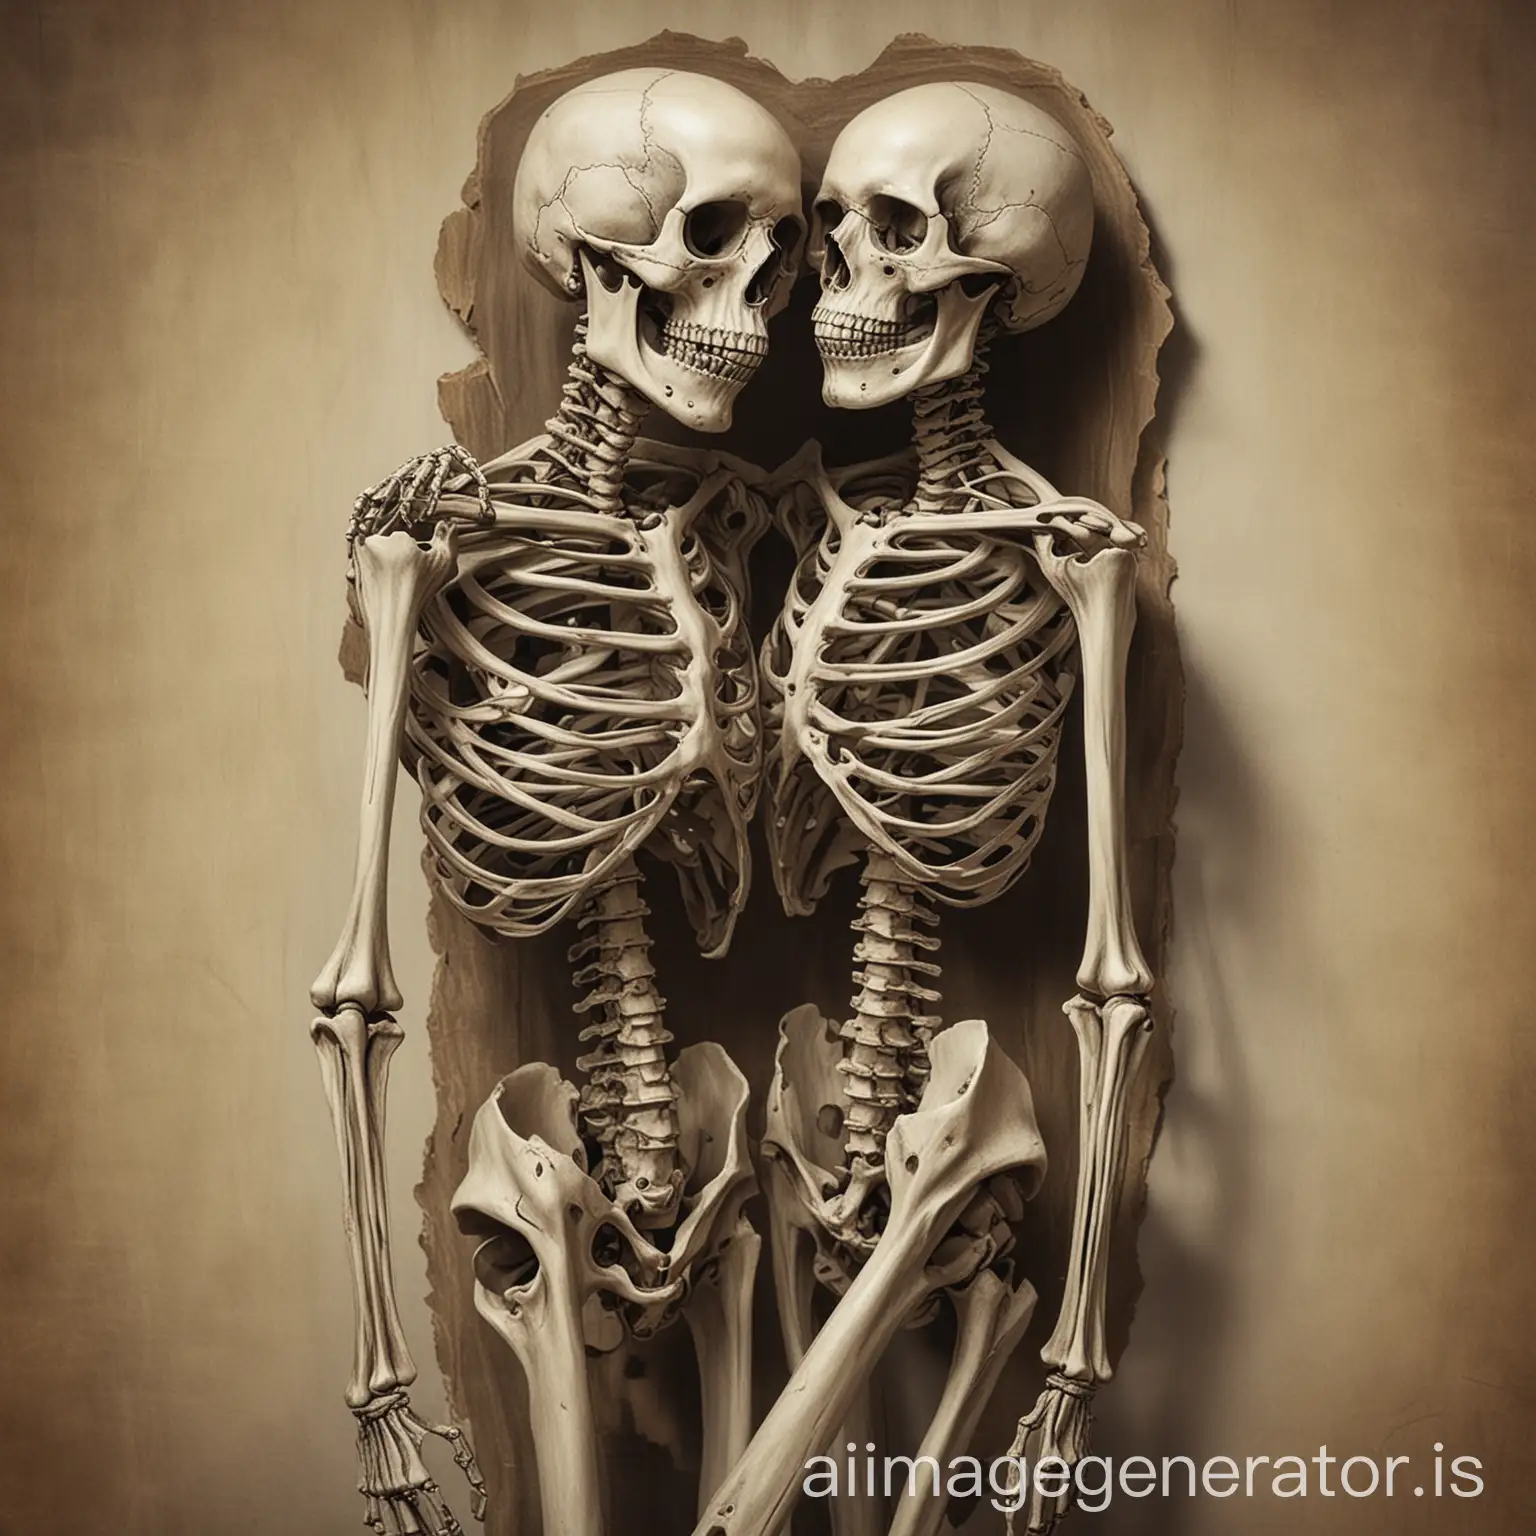 Ethereal-Embrace-Skeletons-in-Intimate-Embrace